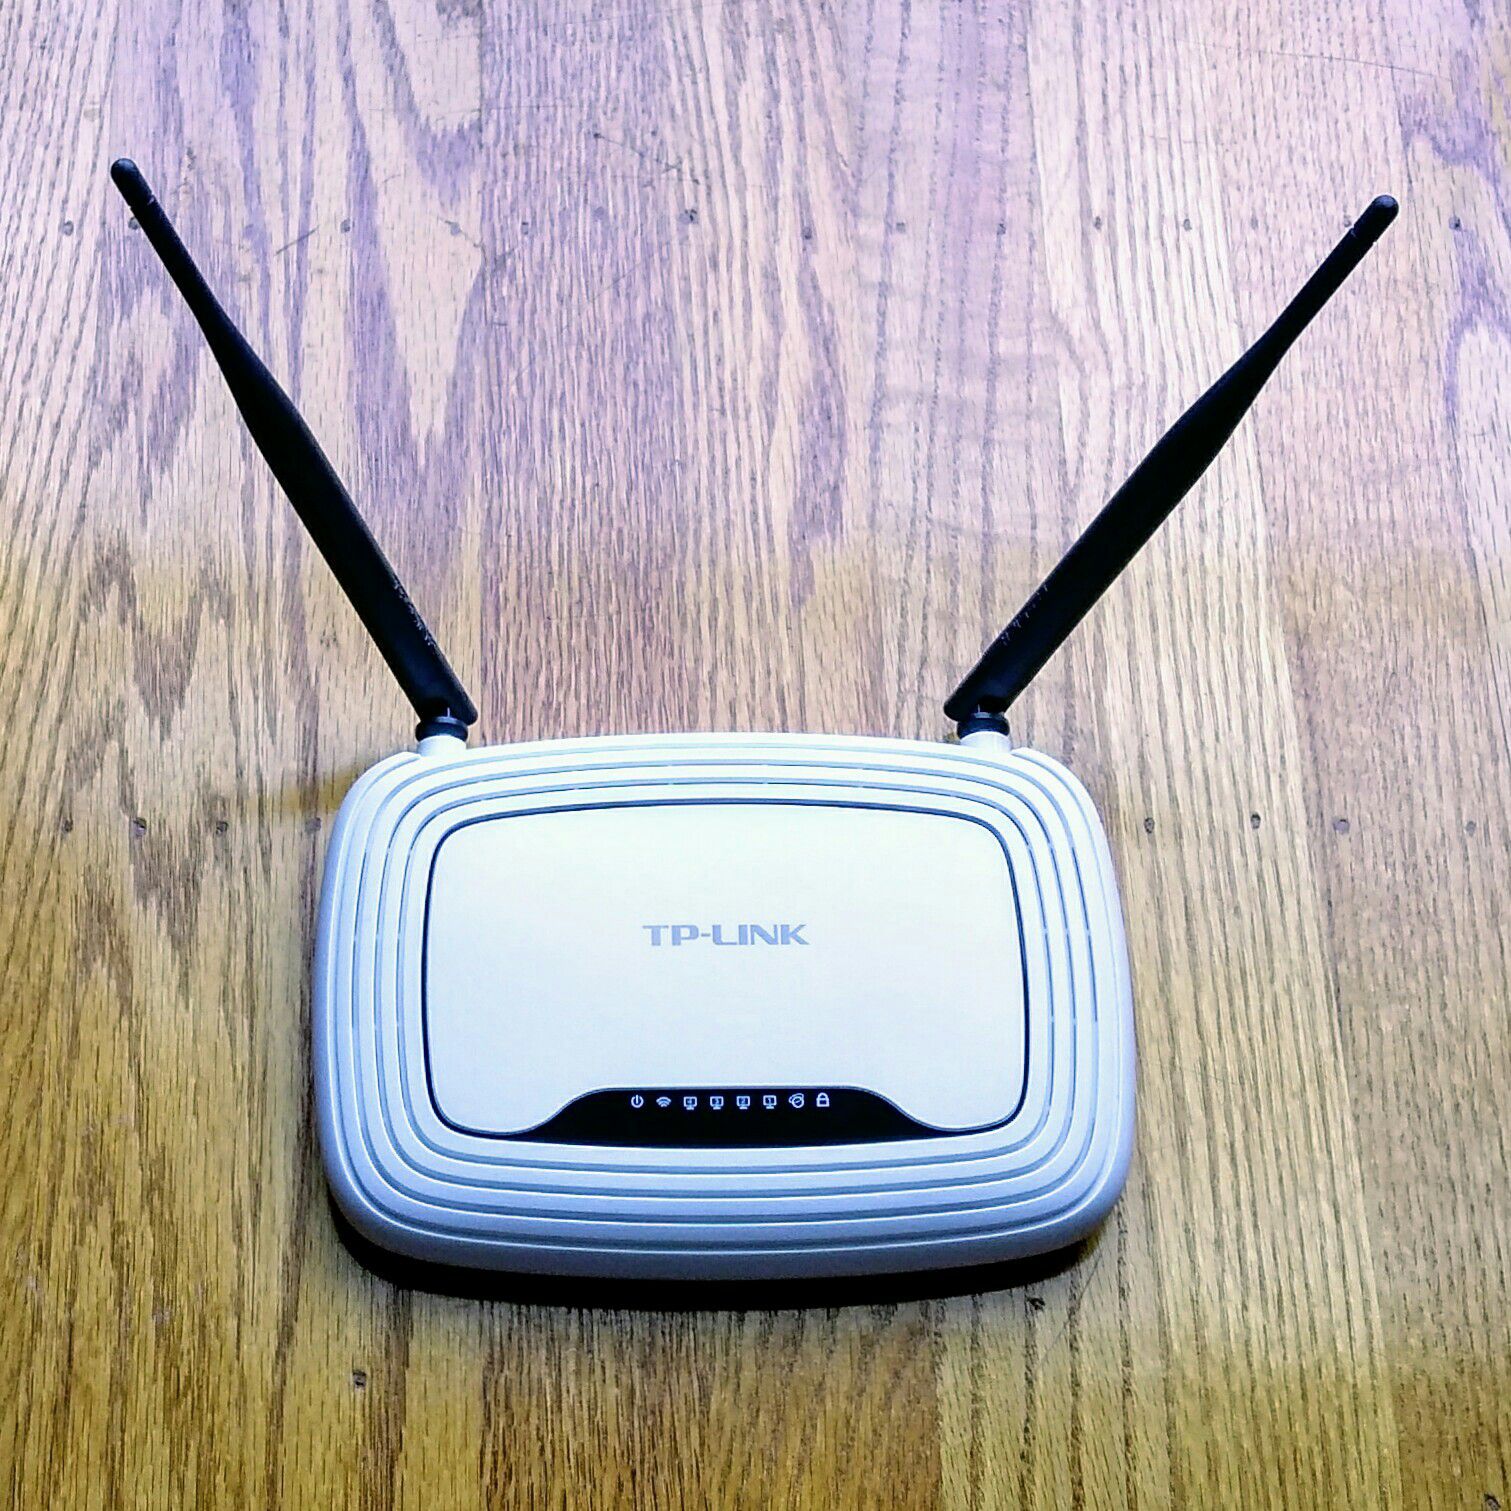 TP-Link 300 Mbps wireless N router